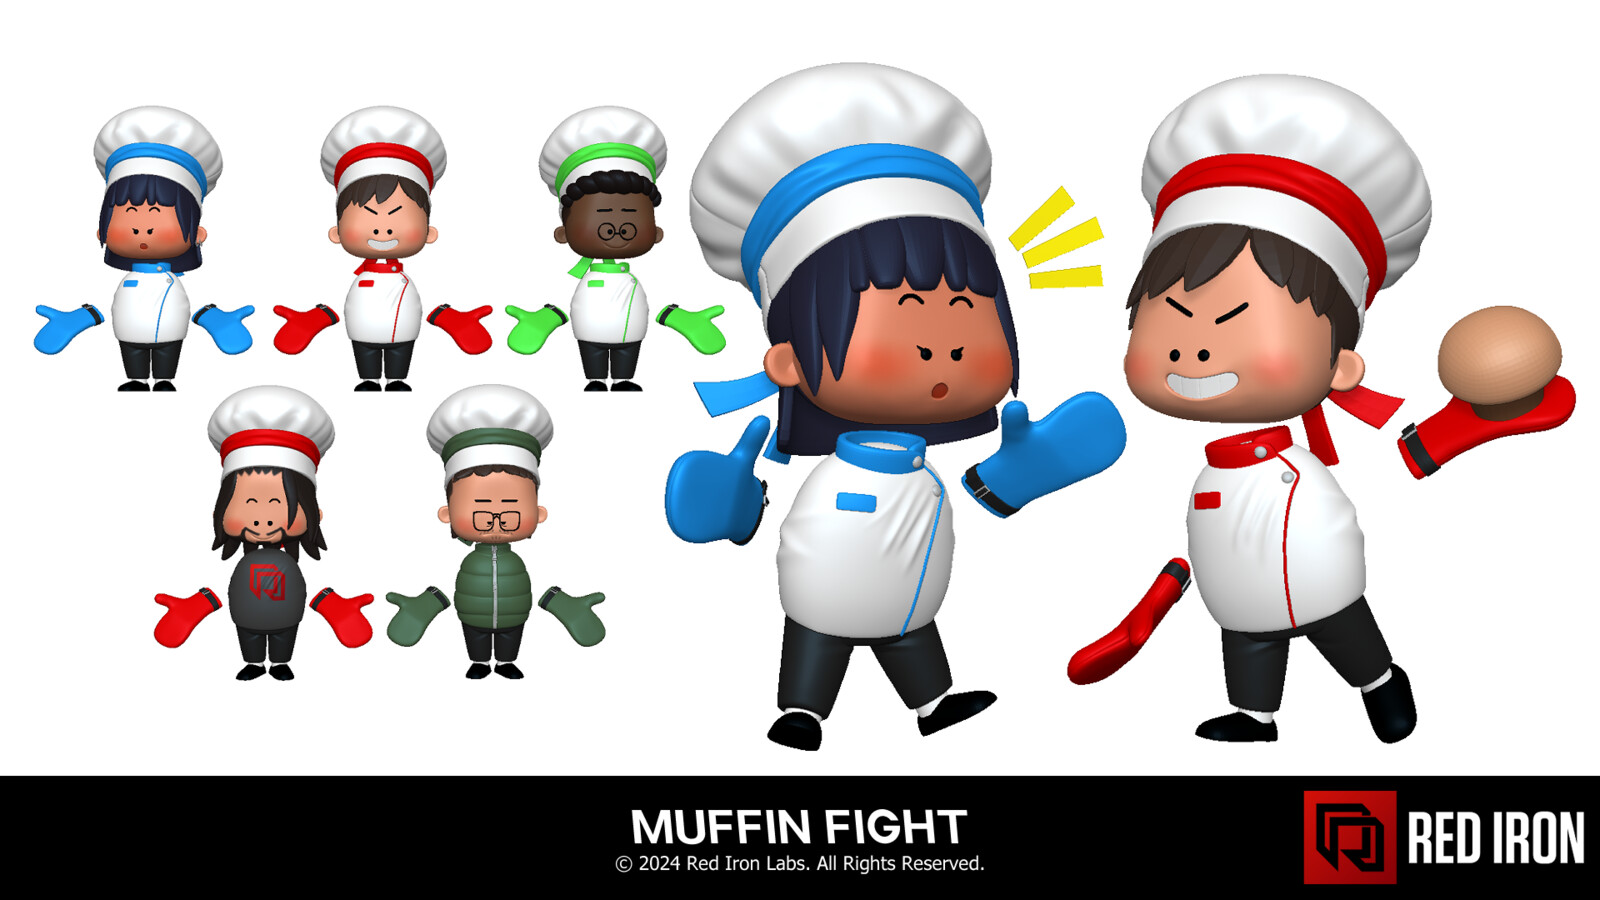 This is how I pitched the new designs to the team. Created a few variations to suggest a character customization system, and created a small scene of two of the chefs.